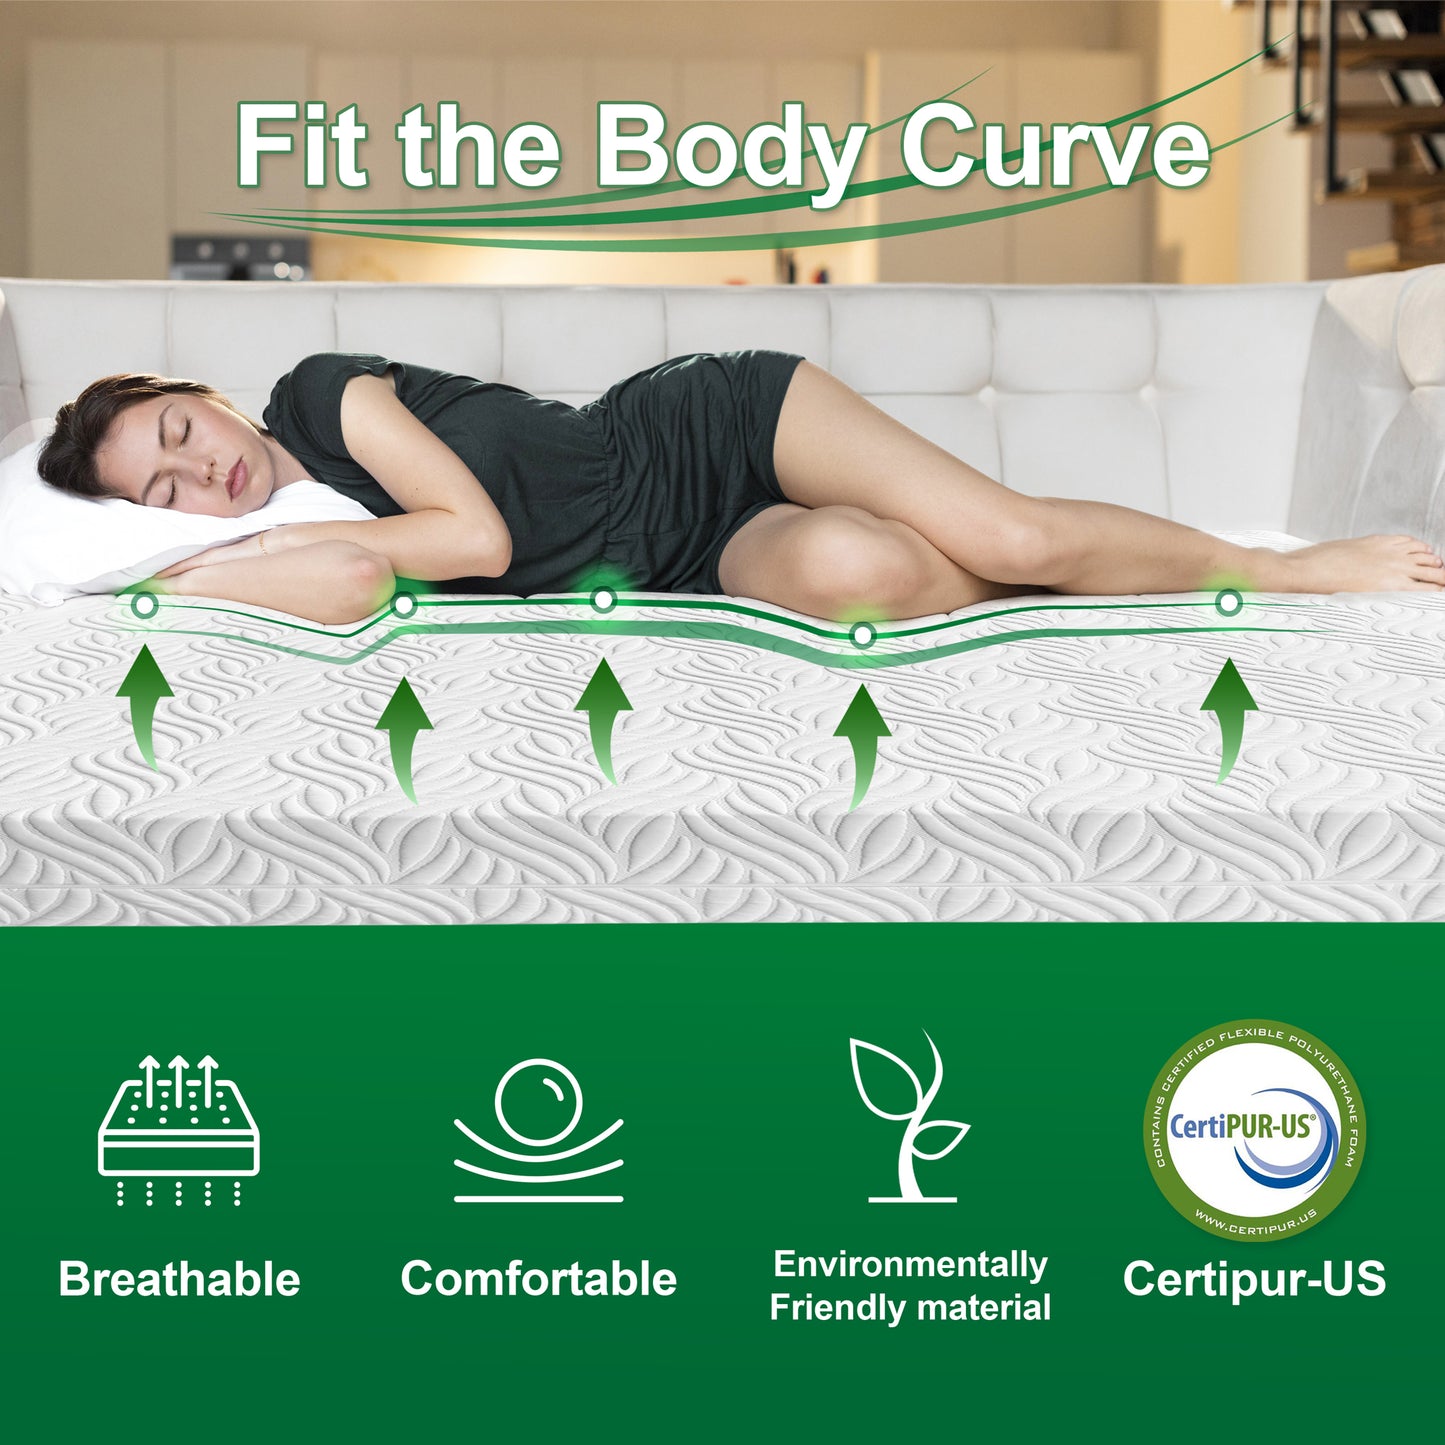 10" Memory Foam Mattress with CertiPUR-US Certified - King